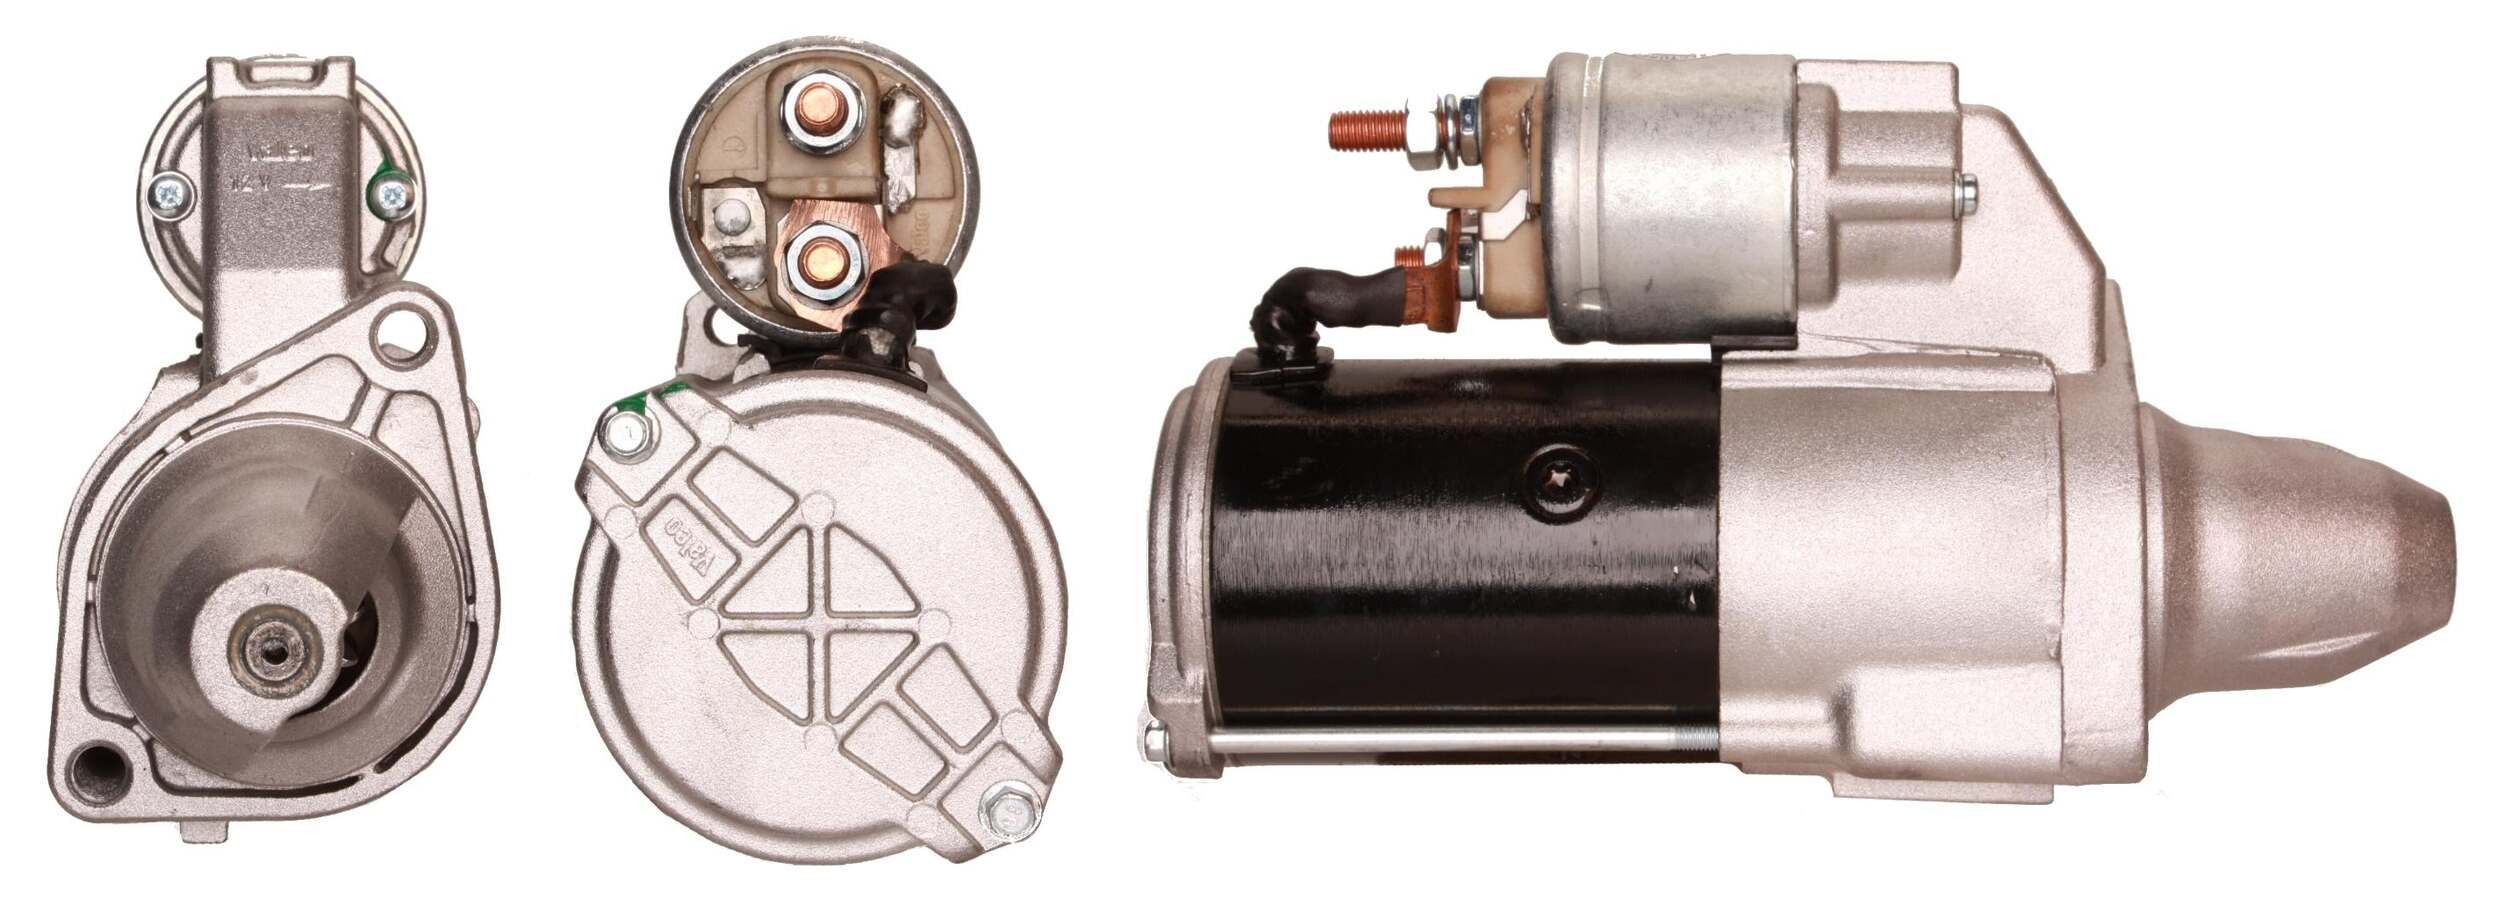 ELSTOCK 25-4031 Starter motor JEEP experience and price